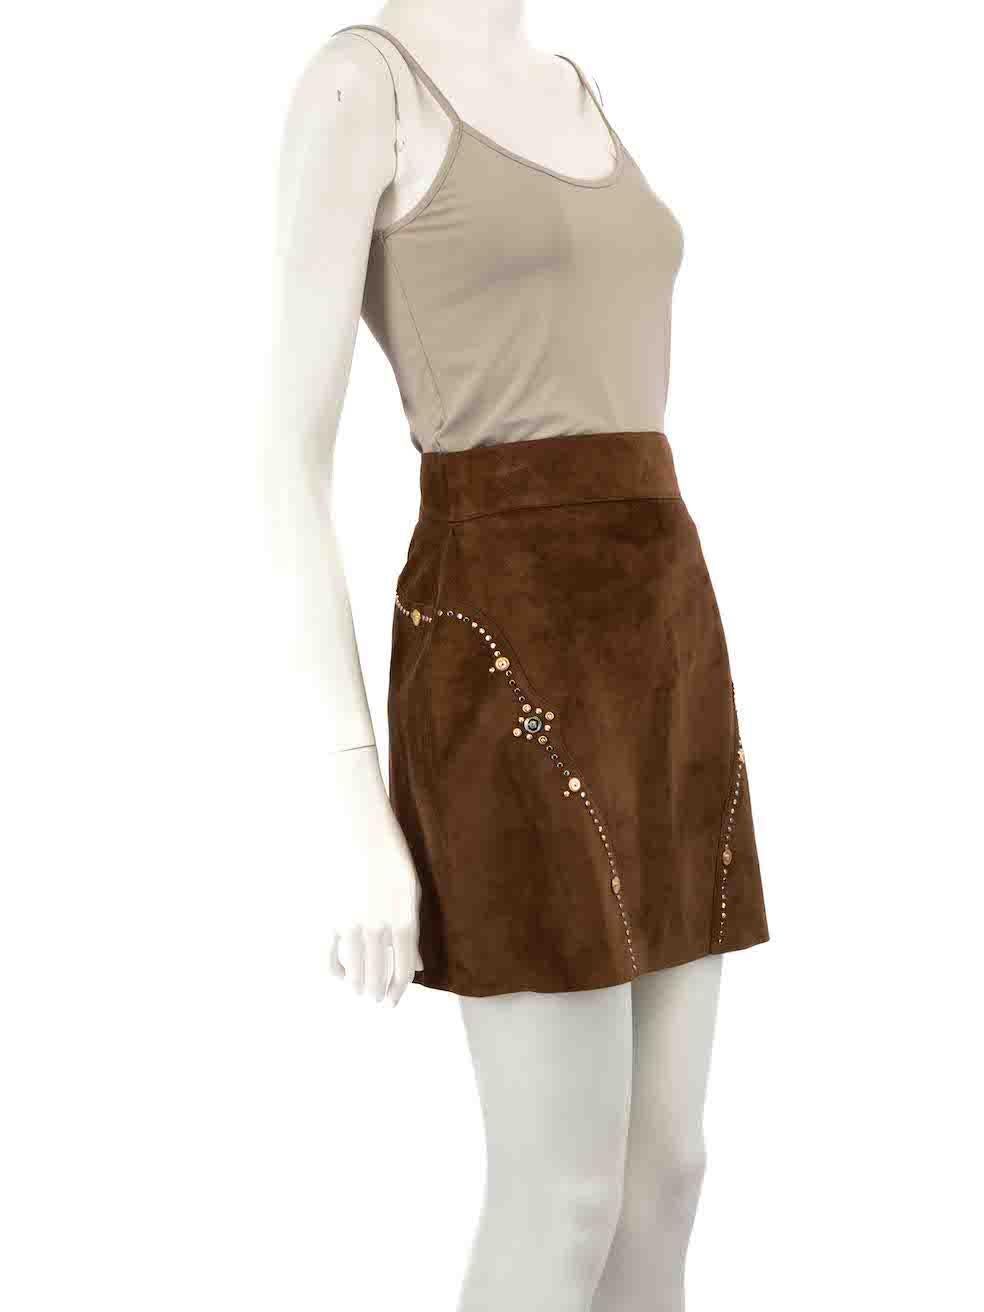 CONDITION is Never worn. No visible wear to skirt is evident on this new Versace designer resale item.
 
 
 
 Details
 
 
 Brown
 
 Suede
 
 Skirt
 
 Mini
 
 Straight fit
 
 Embellished detail
 
 Back zip fastening
 
 
 
 
 
 Made in Italy
 
 
 
